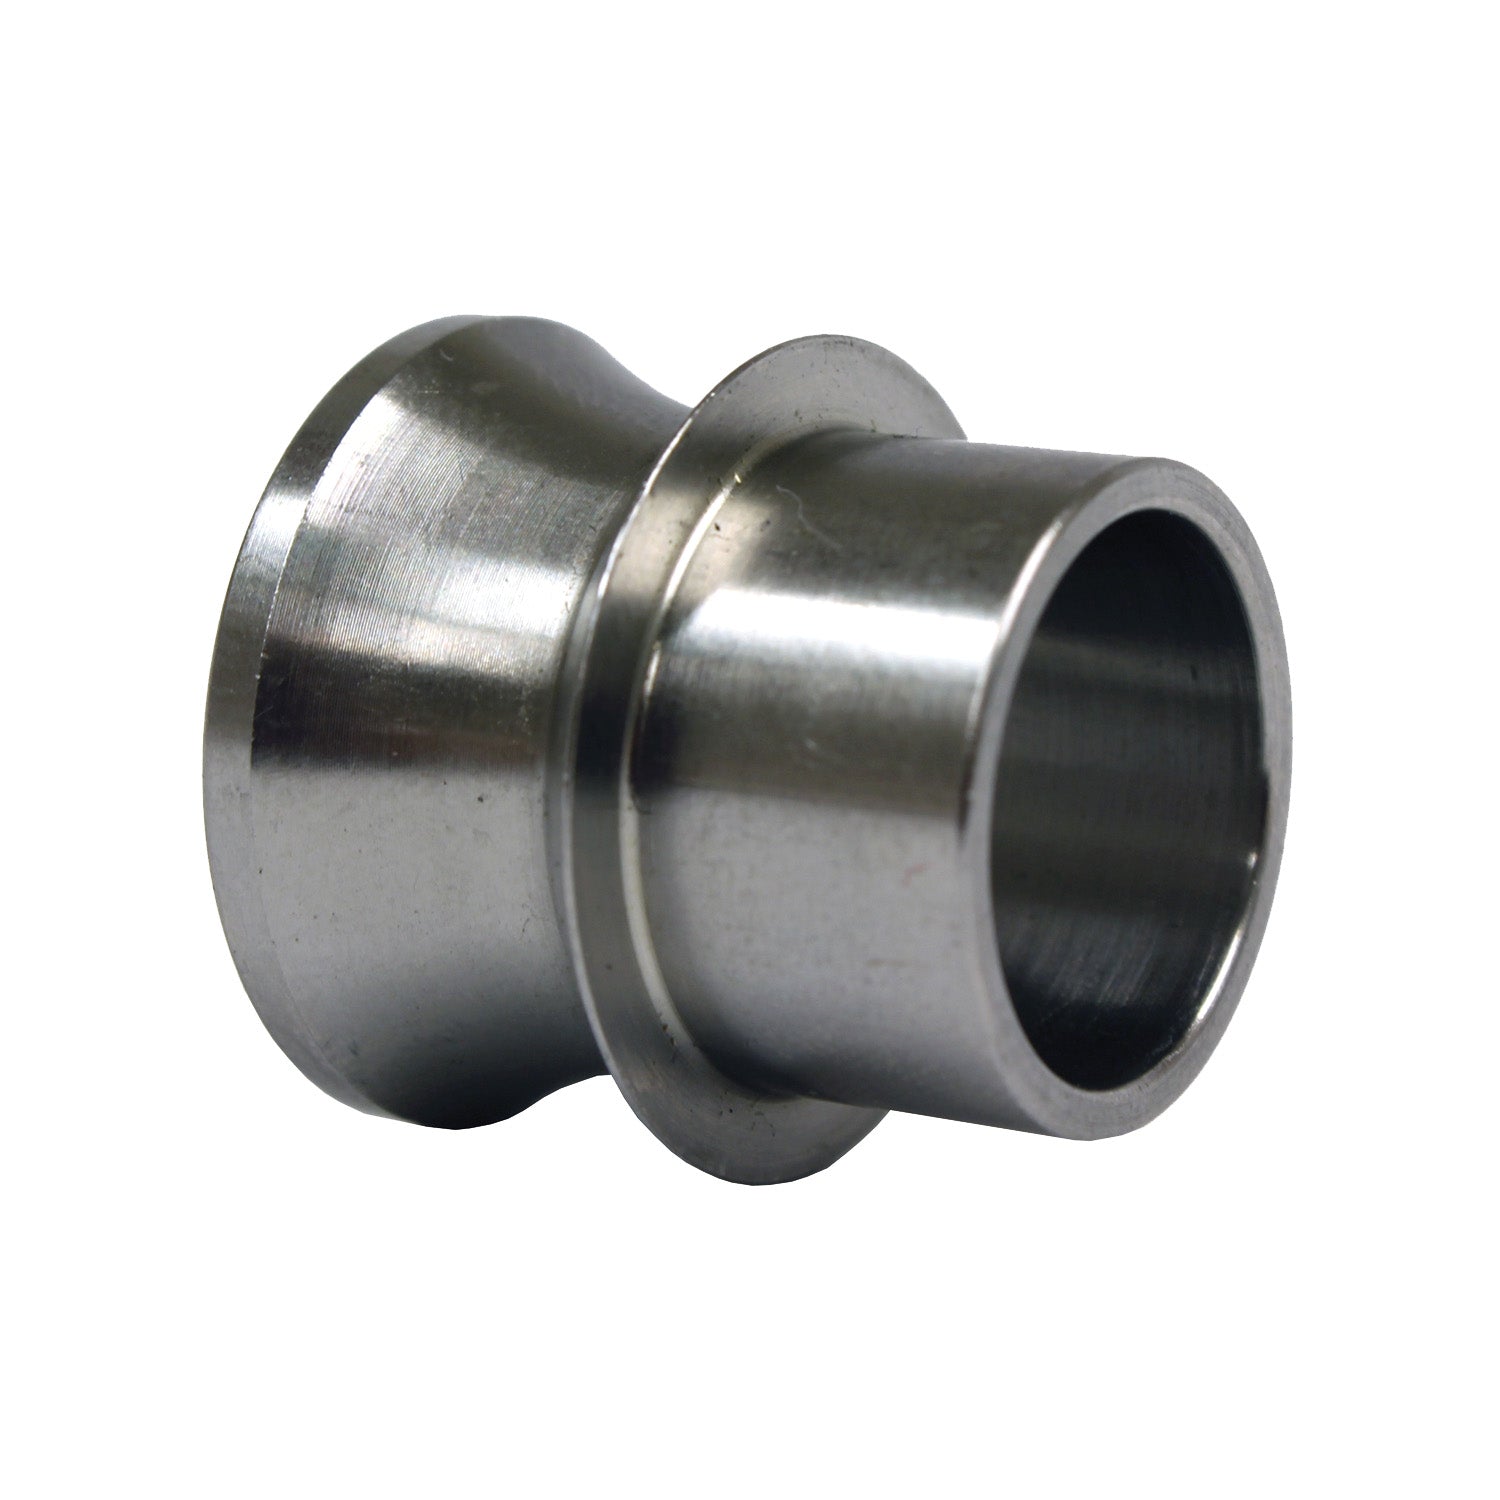 QA1 SN12-68 High Misalignment Spacer, .75 inch Od Ss, .375 inch X 1.75 inch Total Width